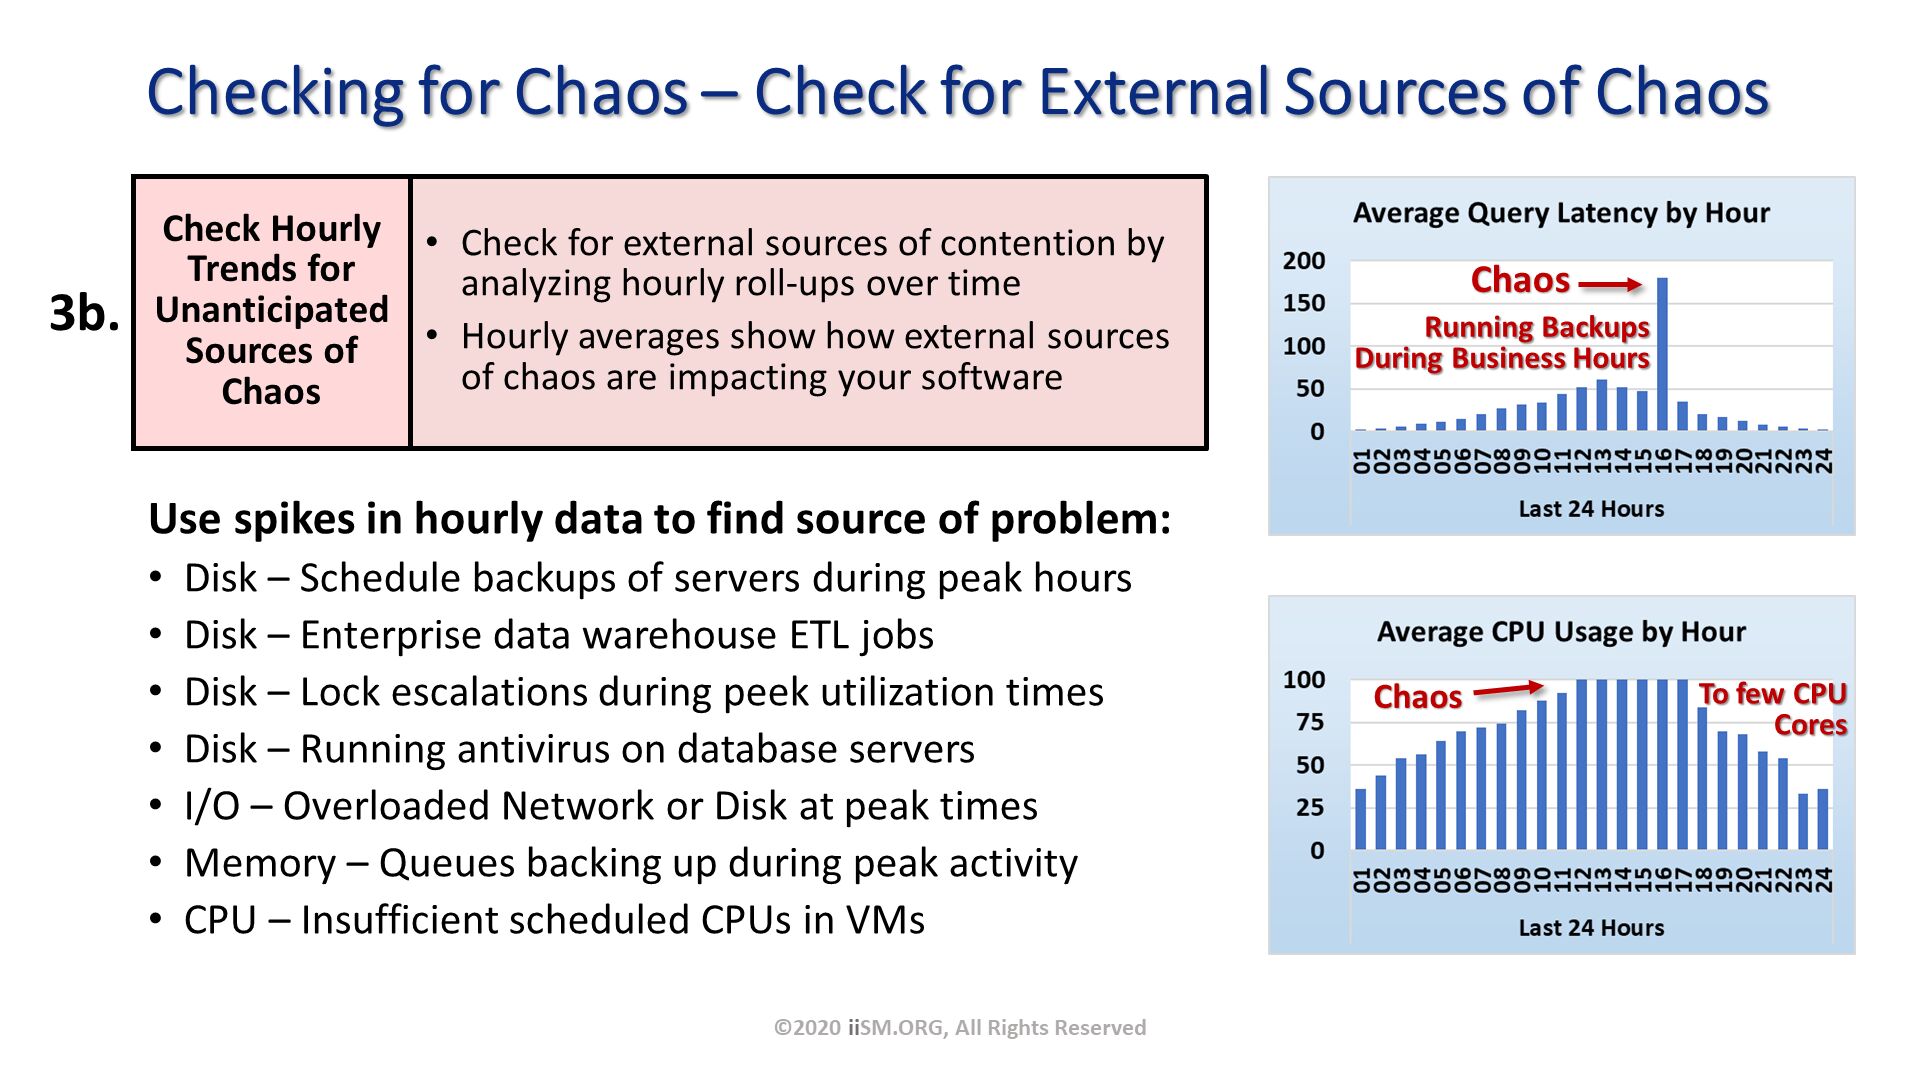 Checking for Chaos – Check for External Sources of Chaos. ©2020 iiSM.ORG, All Rights Reserved. Check Hourly Trends for Unanticipated Sources of Chaos. 3b. Use spikes in hourly data to find source of problem:
Disk – Schedule backups of servers during peak hours
Disk – Enterprise data warehouse ETL jobs
Disk – Lock escalations during peek utilization times
Disk – Running antivirus on database servers
I/O – Overloaded Network or Disk at peak times
Memory – Queues backing up during peak activity
CPU – Insufficient scheduled CPUs in VMs. Check for external sources of contention by analyzing hourly roll-ups over time
Hourly averages show how external sources of chaos are impacting your software. 